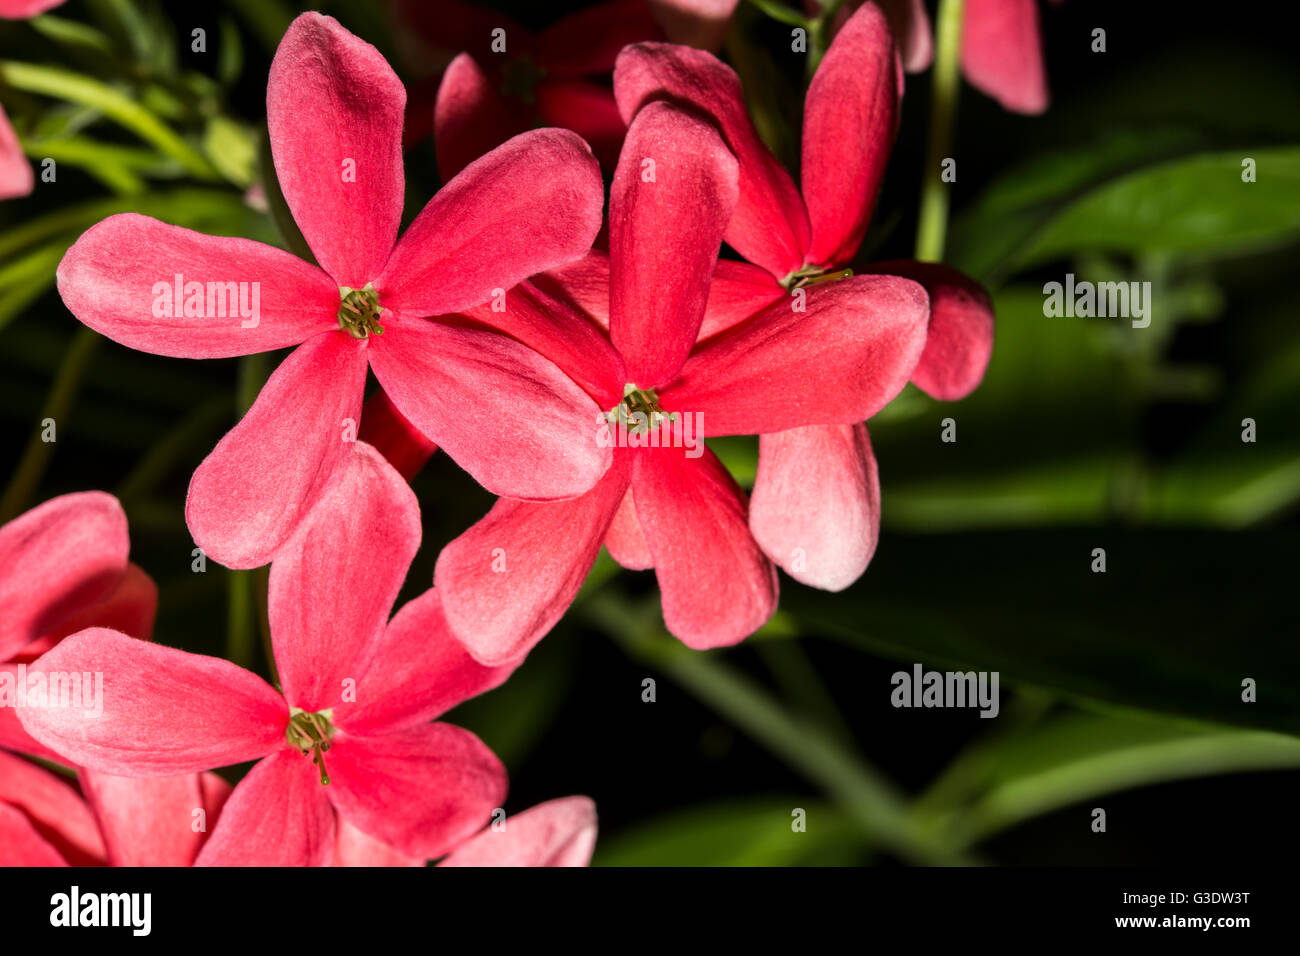 Detail of a bunch of red flowers in flash with green leaves Stock Photo